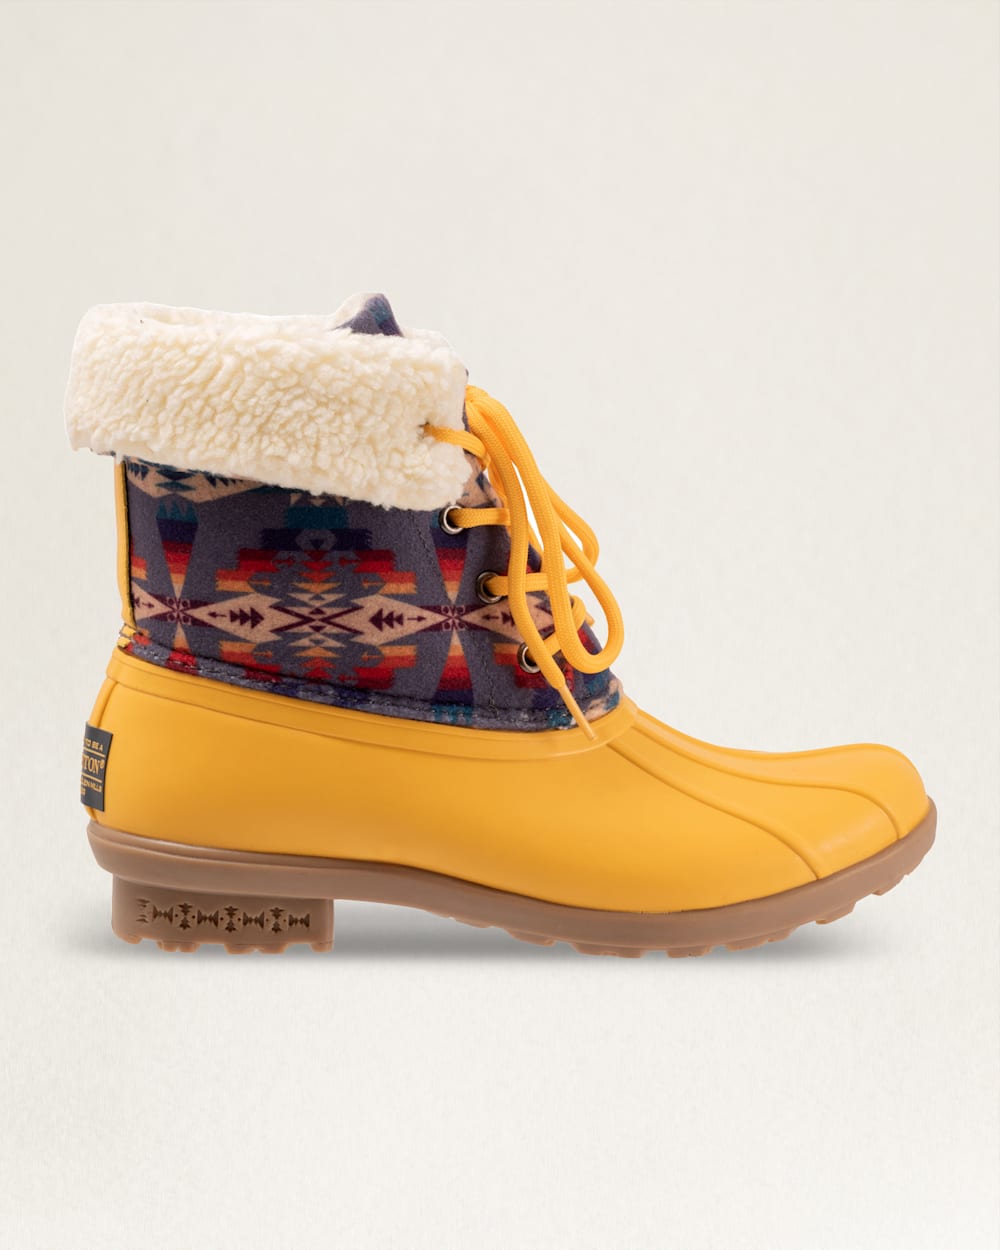 ALTERNATE VIEW OF WOMENS TUCSON DUCK MID BOOT IN YELLOW image number 7